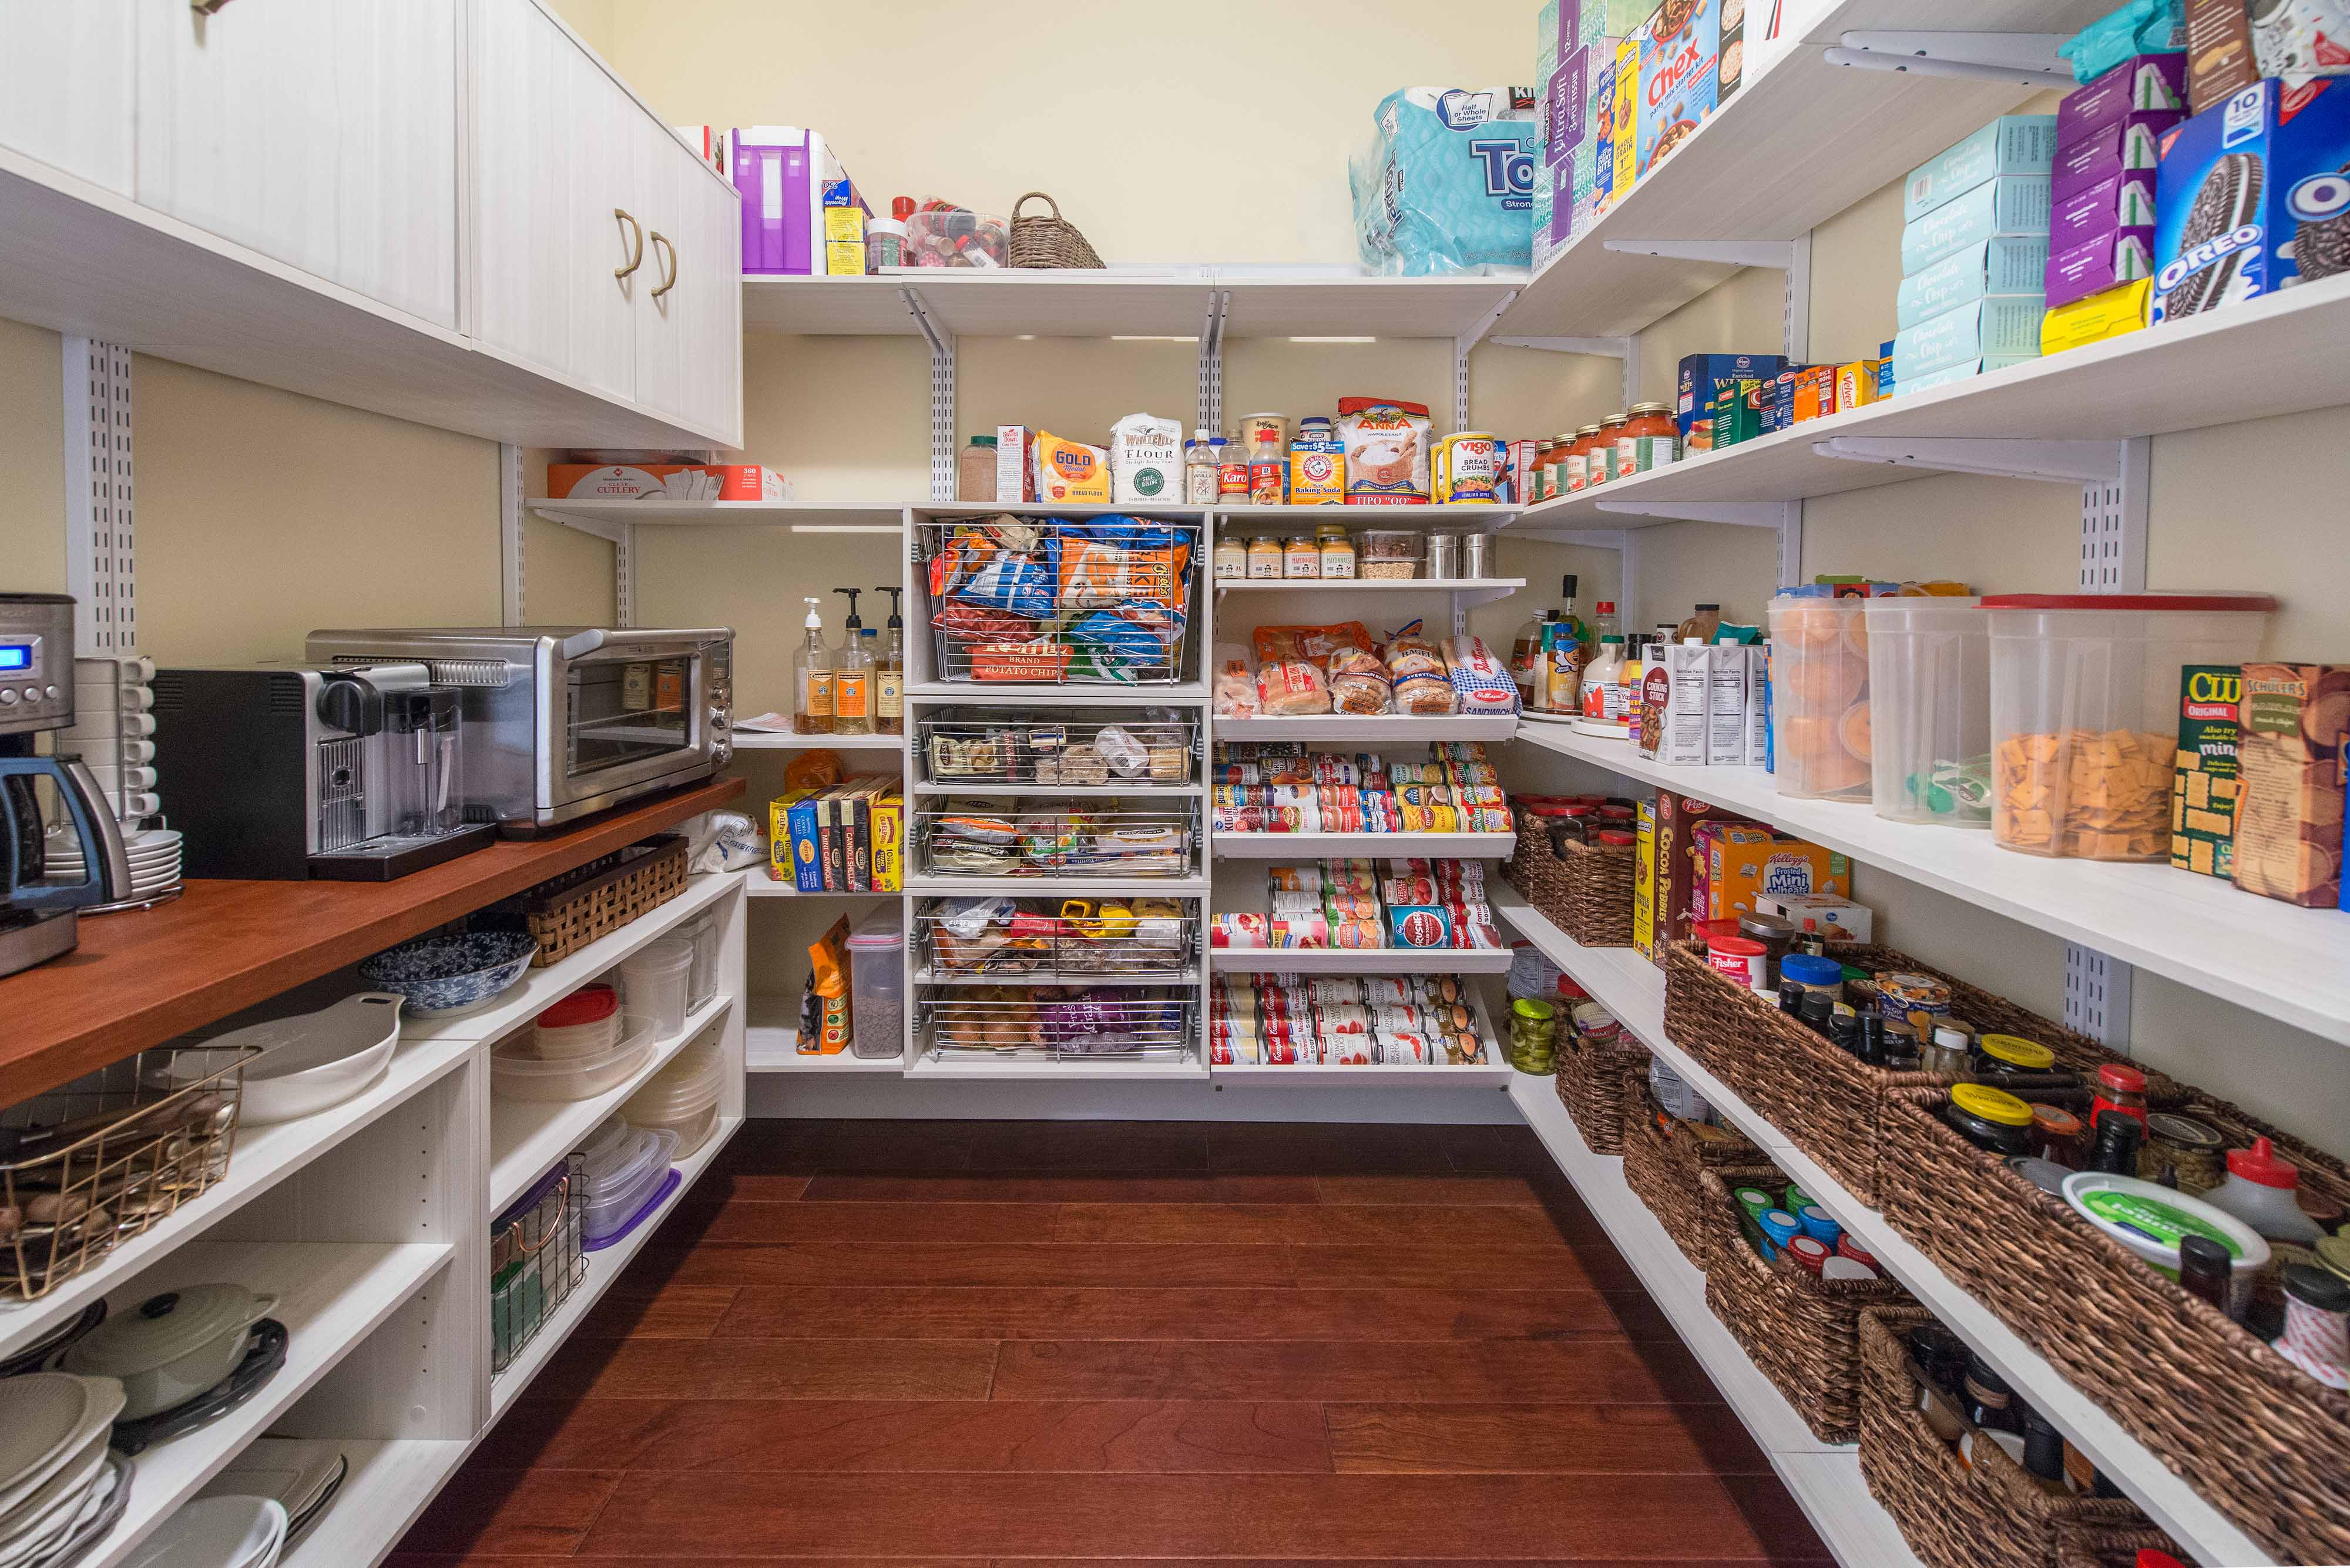 Organized Living Shares The Top 7 Pantry Trends Homeowners Are Willing ...